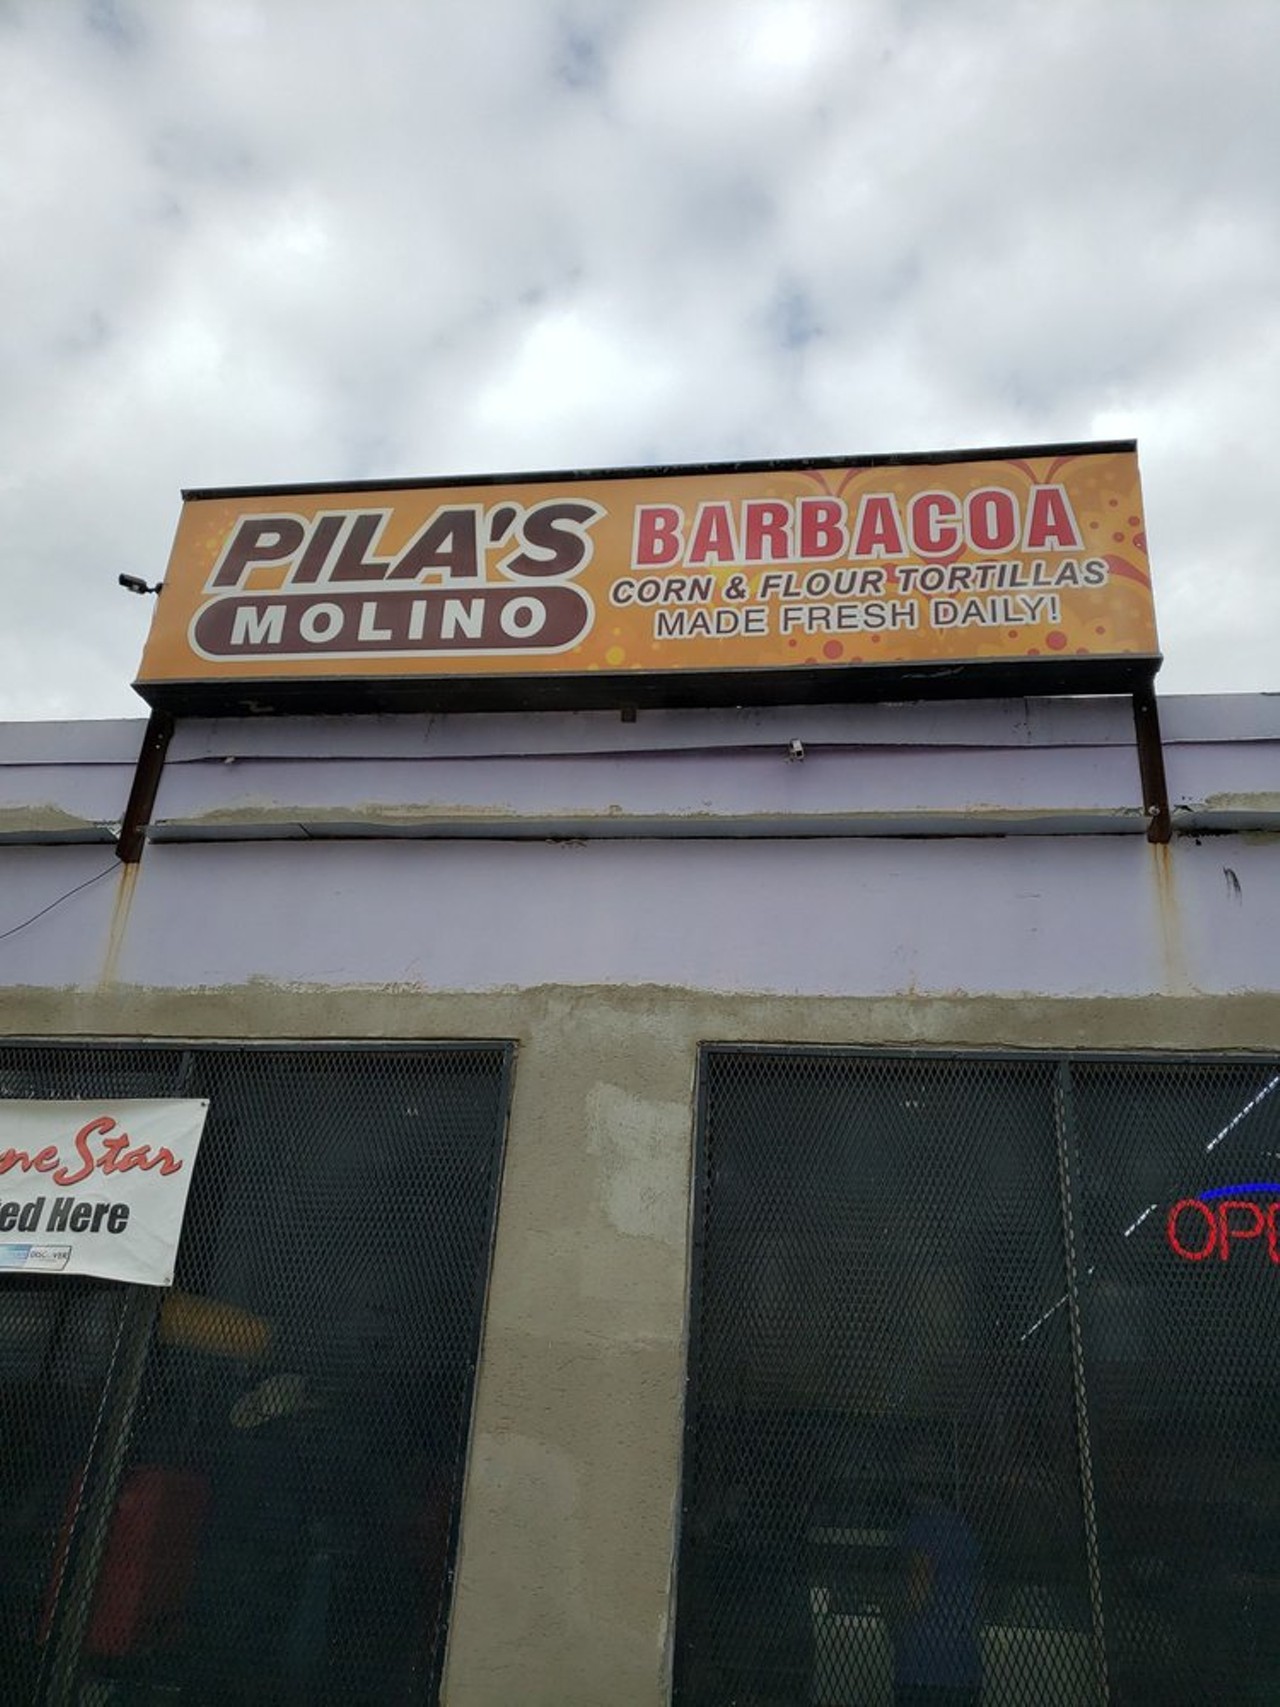 Pila’s Molino
519 Enrique M. Barrera Pkwy, (210) 361-3866, mexicanfoodsanantonio.com
You can obviously expect authentic, homemade tortillas from Pila’s. Made fresh daily, these tortillas will hit the spot either you buy them by the dozen or just have a couple with your meal. You can also buy masa by the pound for just $1!
Photo via Yelp / Angelica G.